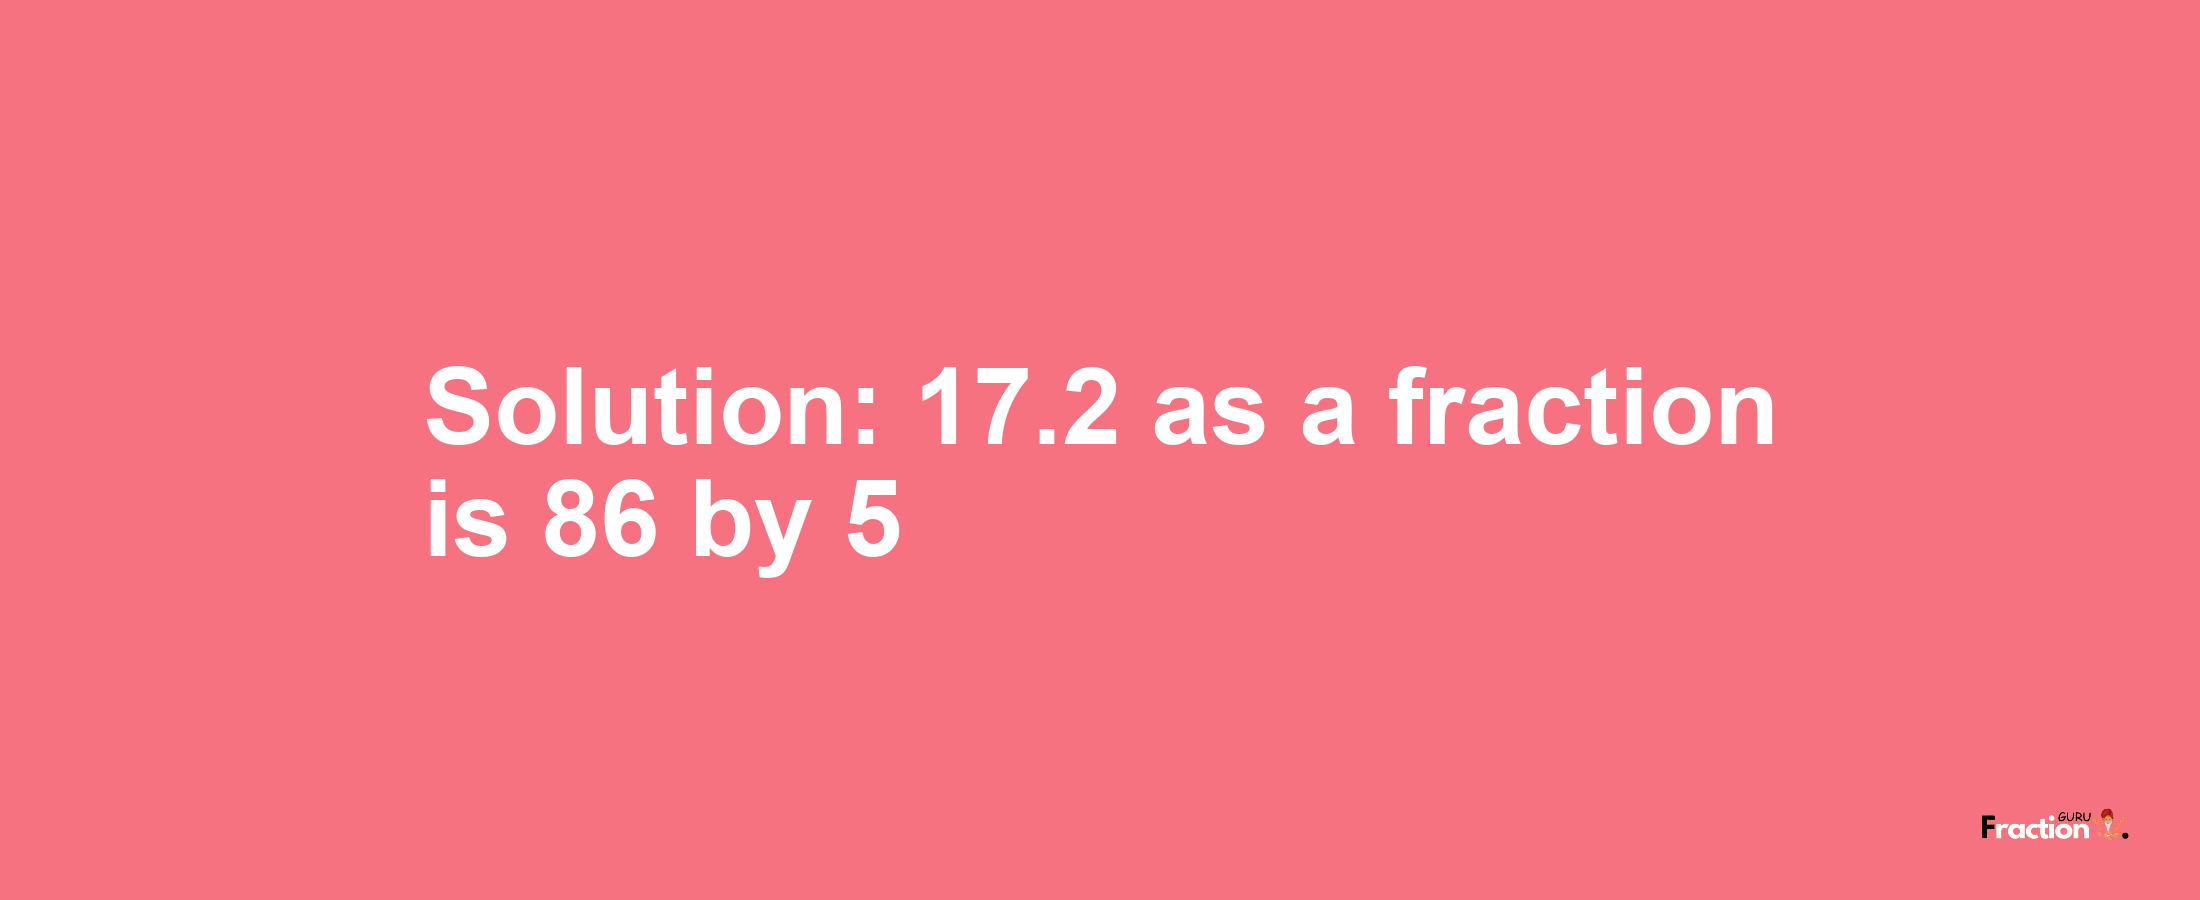 Solution:17.2 as a fraction is 86/5